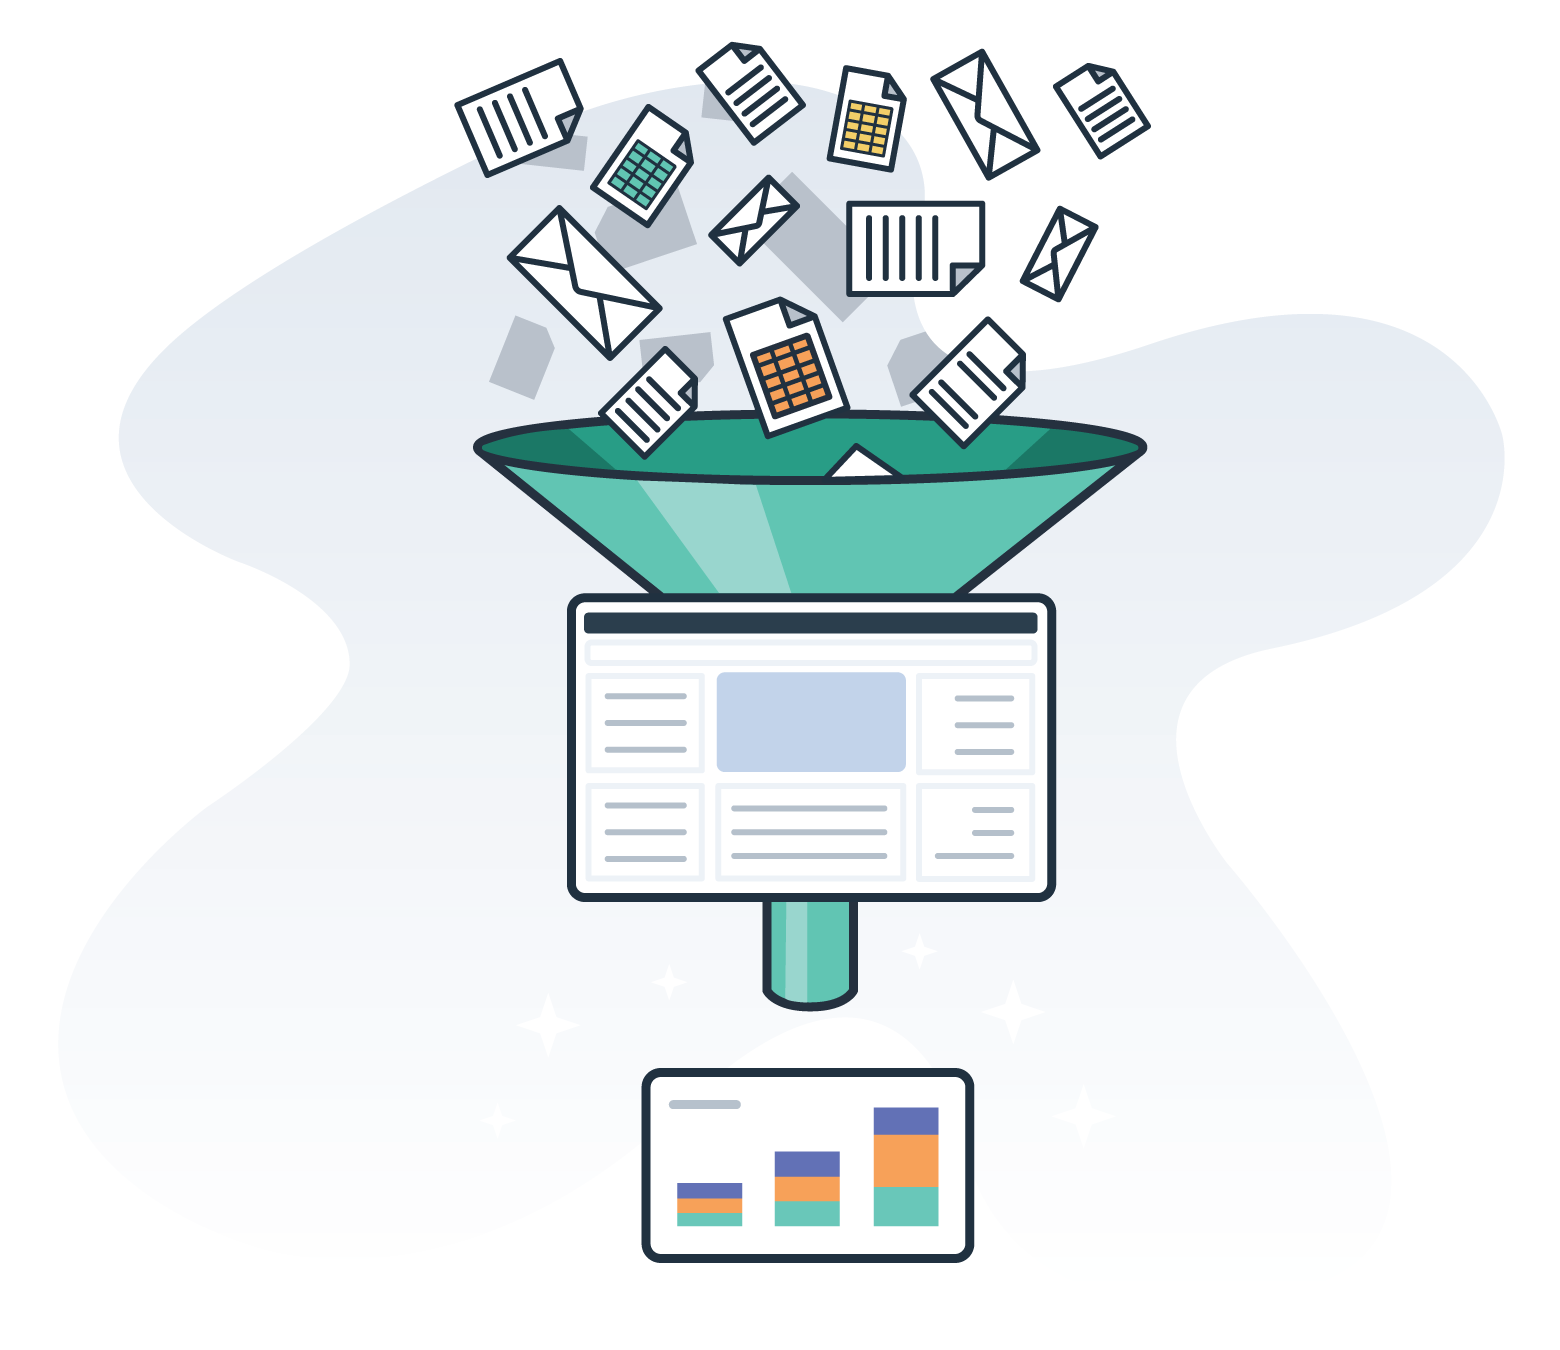 Ta-3 - Take your paperwork and put it all into a digital experience - funnel illustration